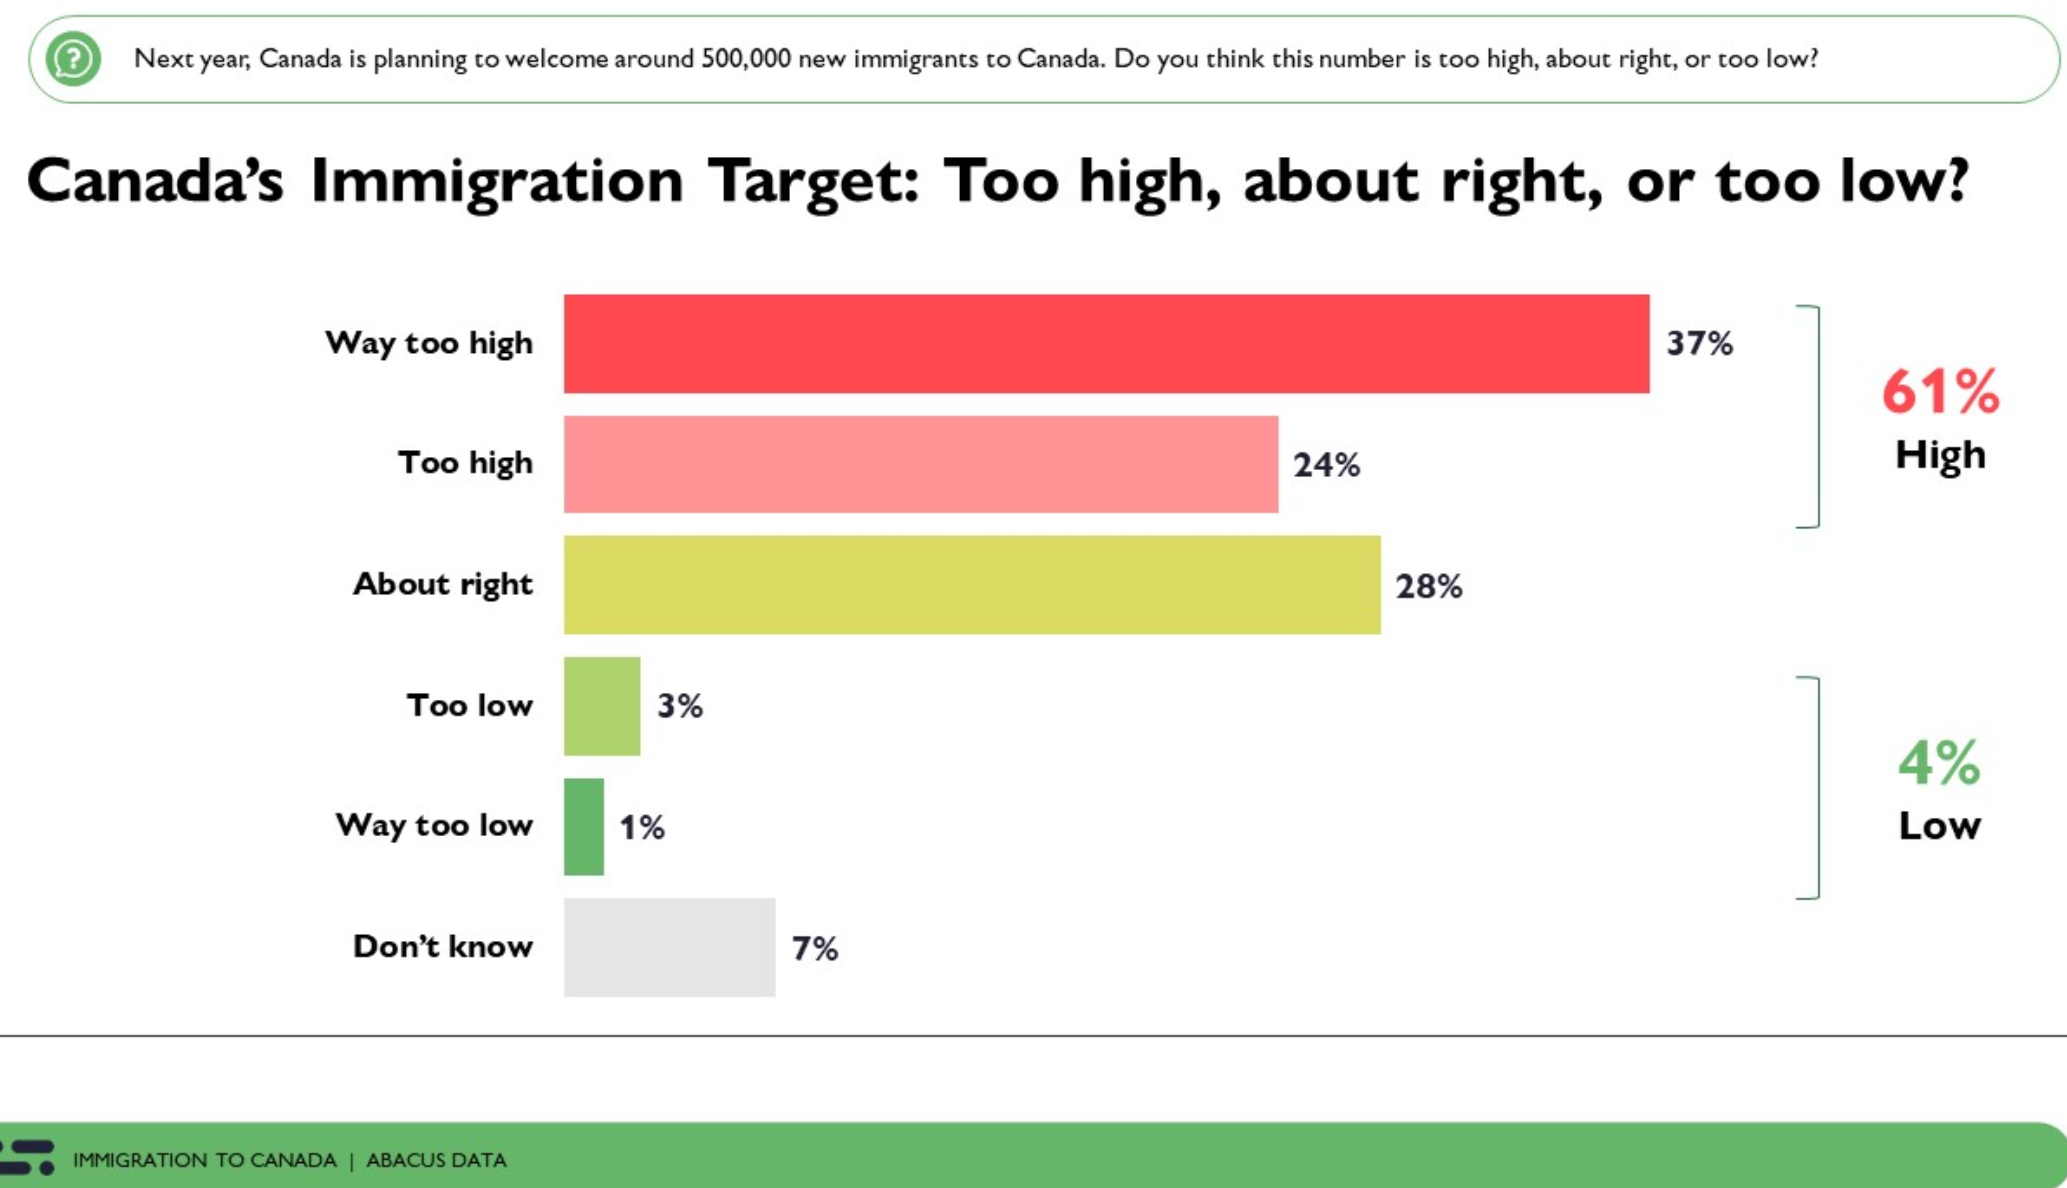 Canadian immigration views